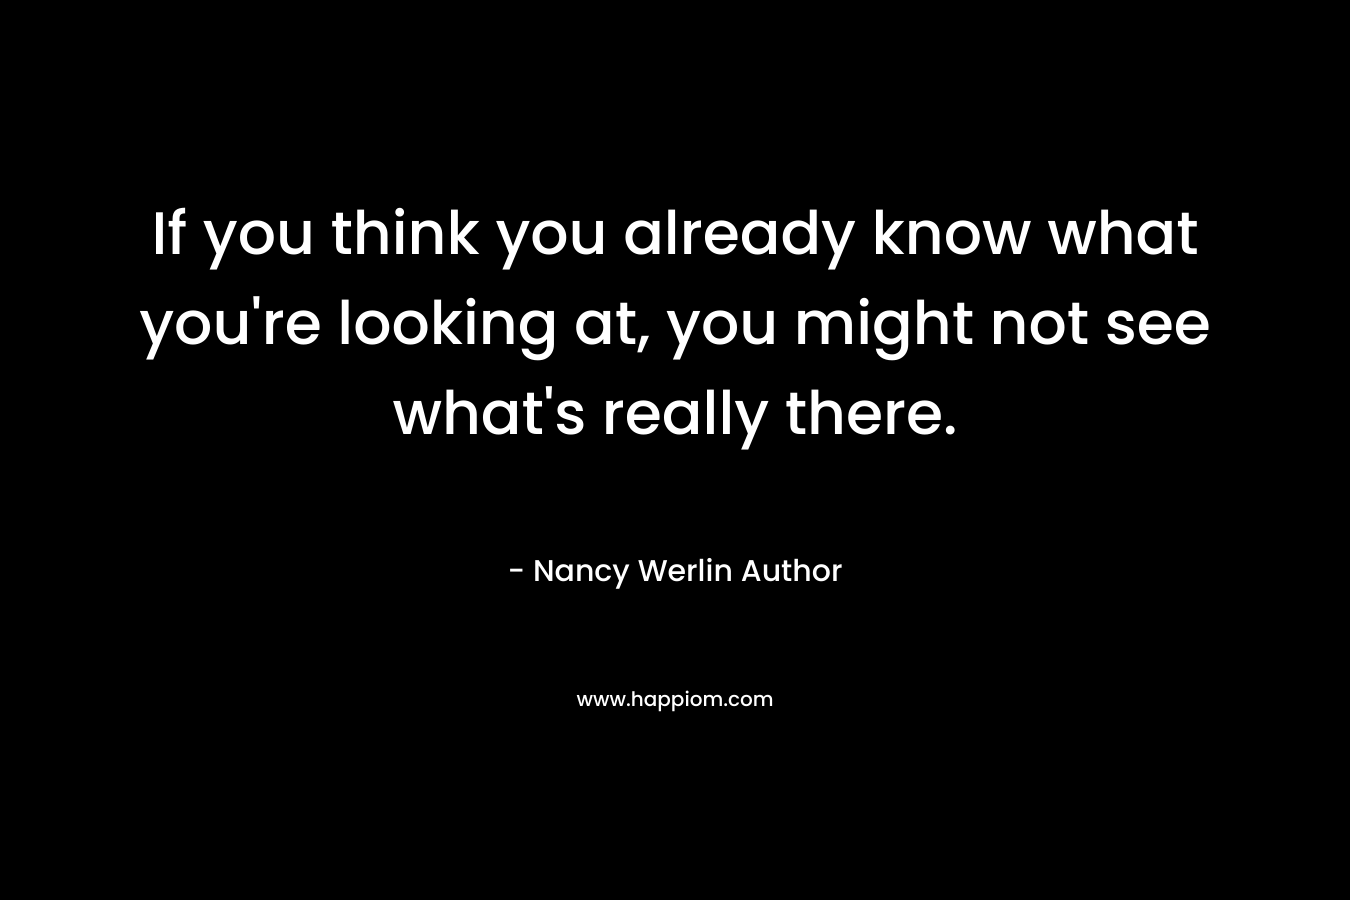 If you think you already know what you’re looking at, you might not see what’s really there. – Nancy Werlin Author